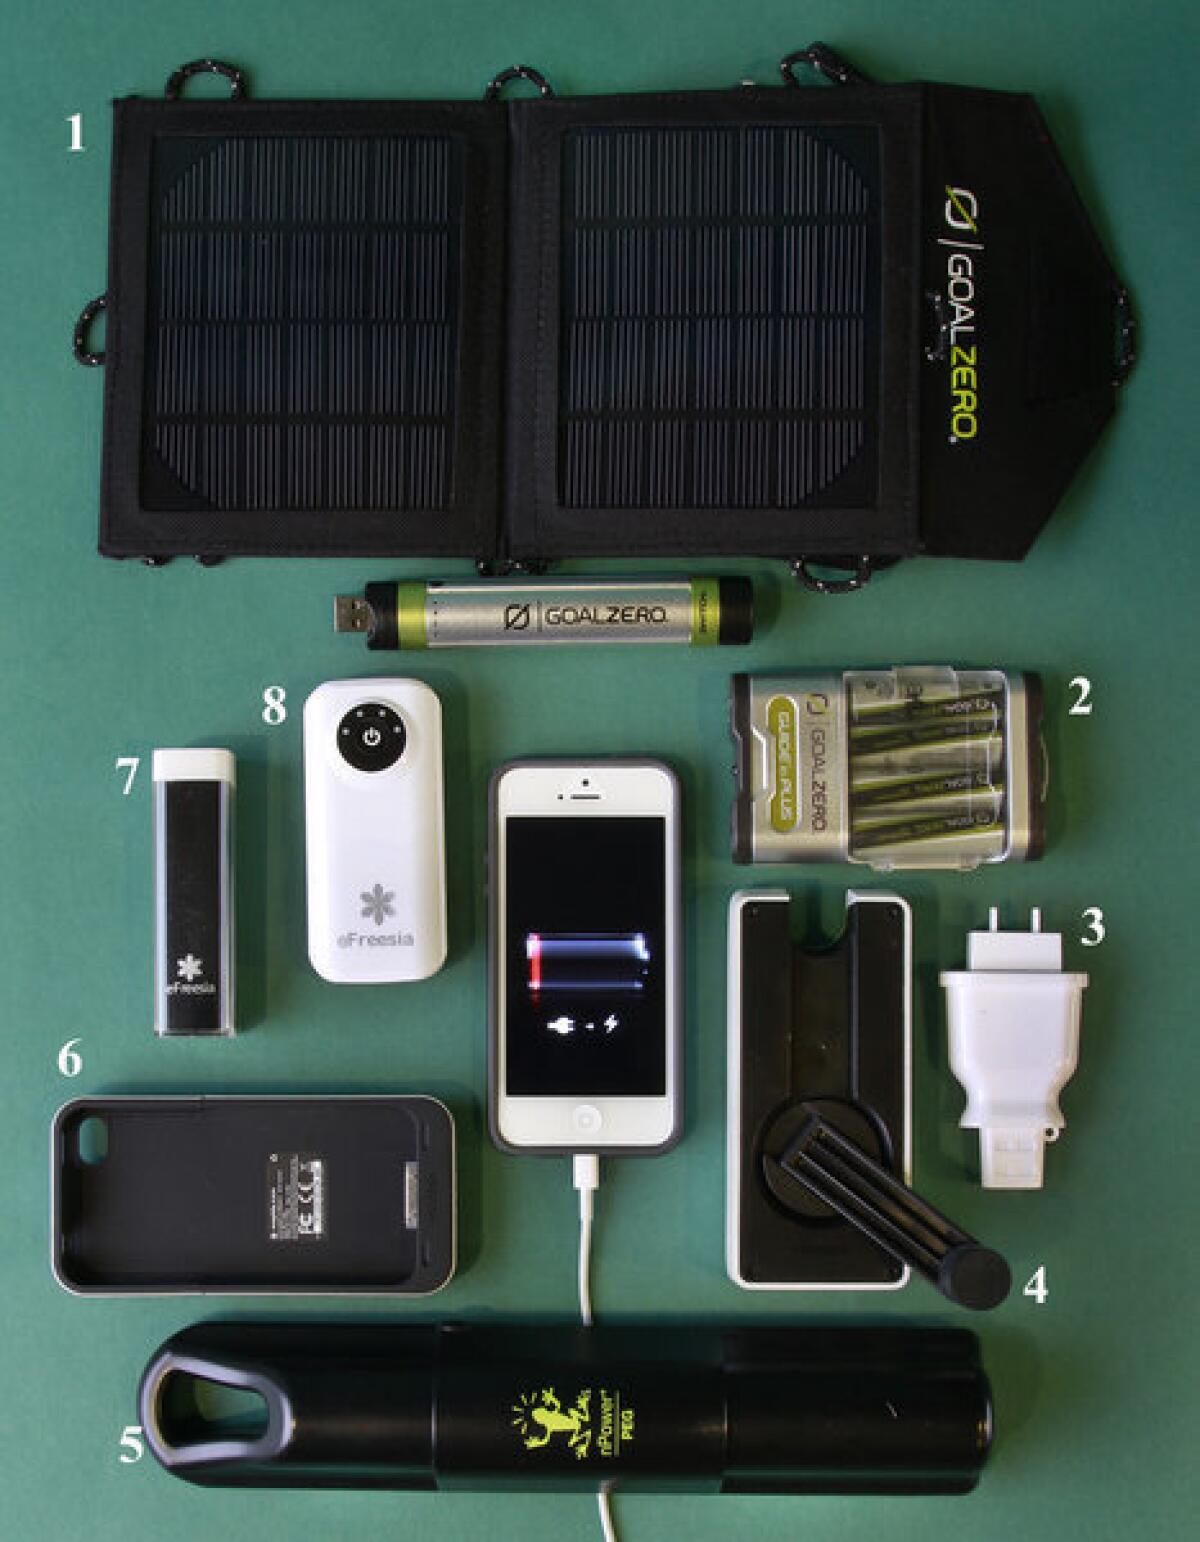 For on-the-go cellphone recharging: 1. Panels for Goal Zero's Switch 8 Solar Recharging Kit, with its cylindrical battery pack directly below. 2. The AAA battery pack for Goal Zero's more powerful Guide 10 Plus Adventure Kit, which comes with slightly larger solar panels (not shown). 3. Molla Space's Plug. 4. Eton's BoostTurbine2000. 5. The nPower Peg. 6. Mophie Juice Pack Air. 7. The eFreesia Mini. 8. The eFreesia Bar.